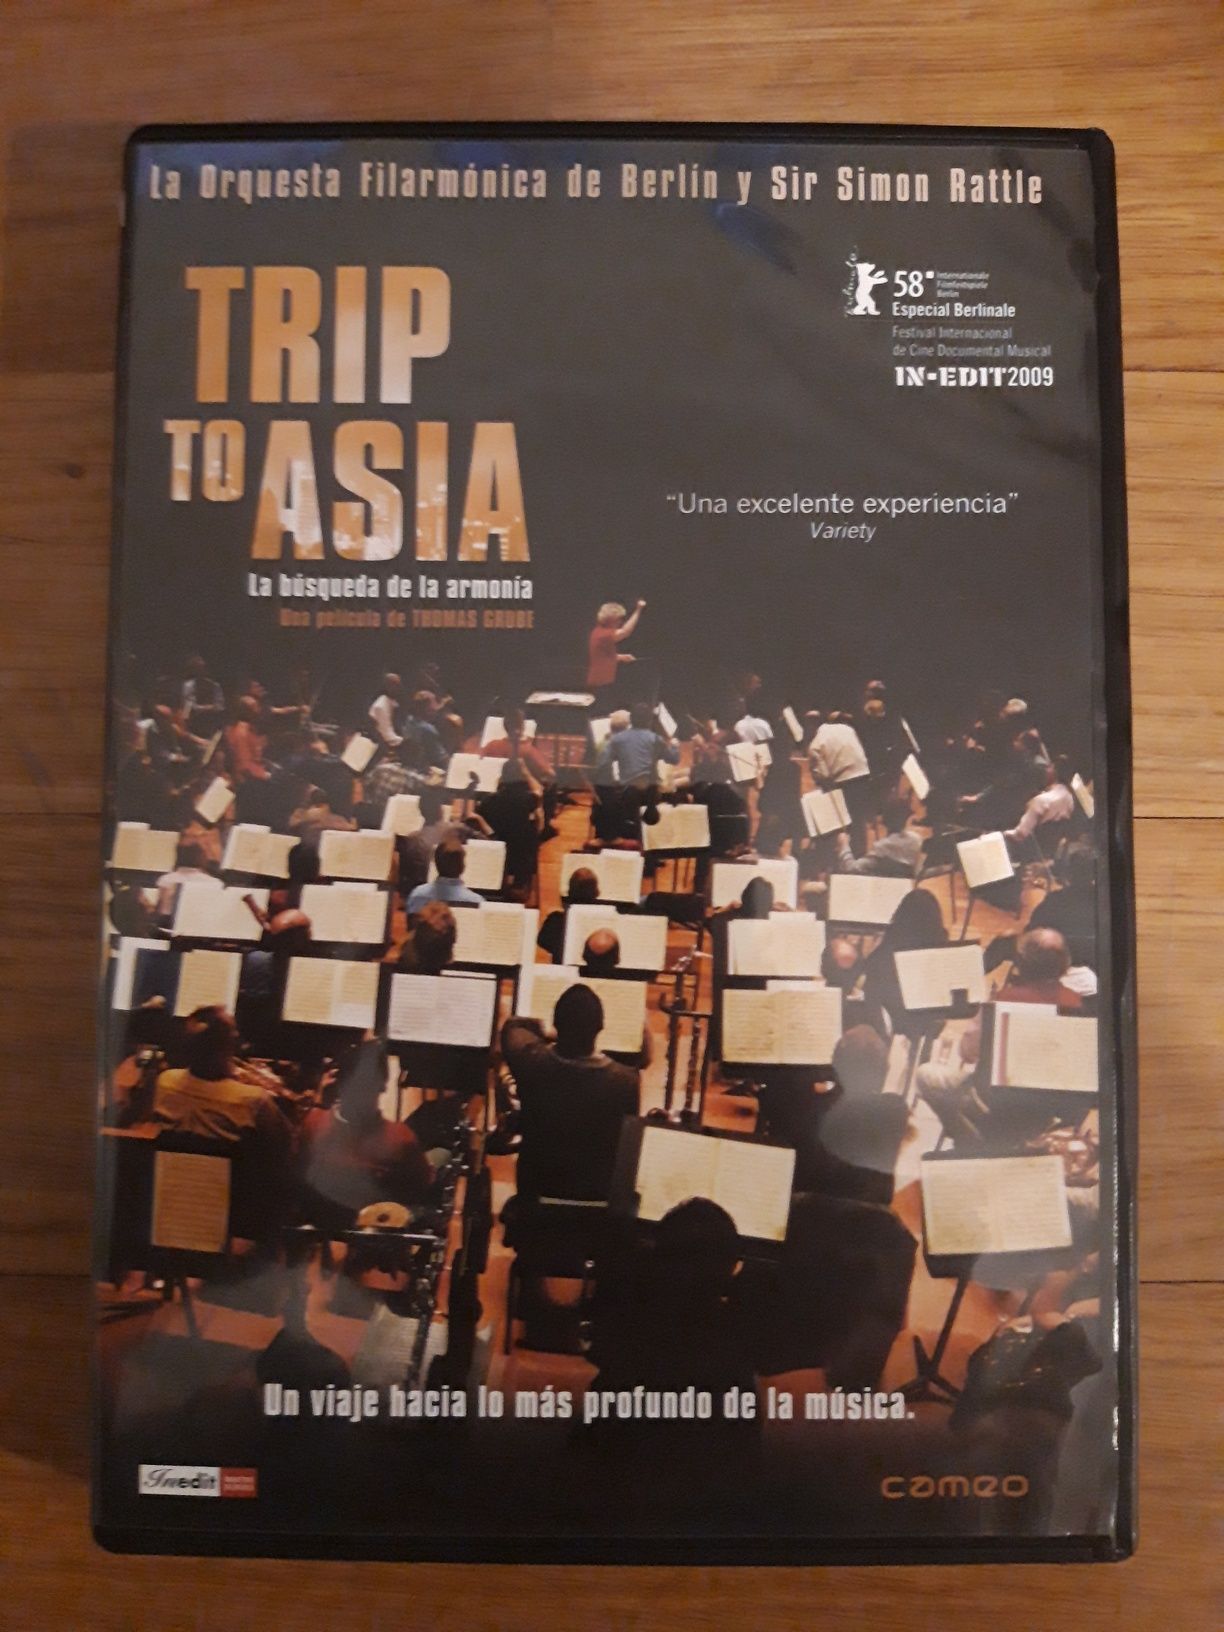 DVD "Trip to Asia" - Berliner Philharmoniker with Sir Simon Rattle